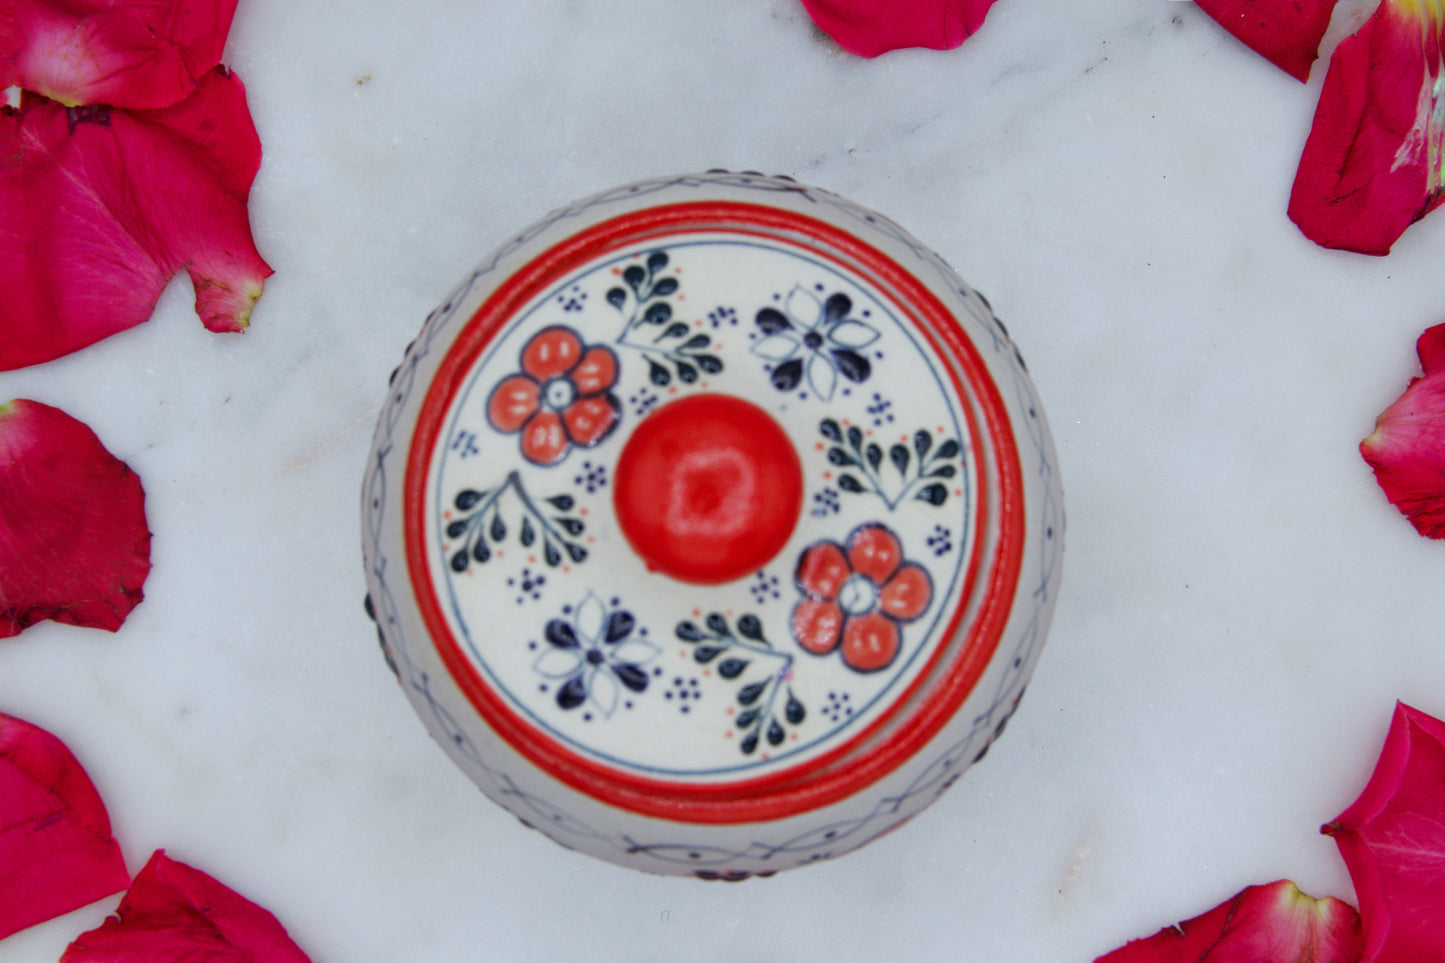 Top view of the handmade artisanal jar in a red floral design talavera with a closed lid on its side. Custom made by Artisan in Mexico. 